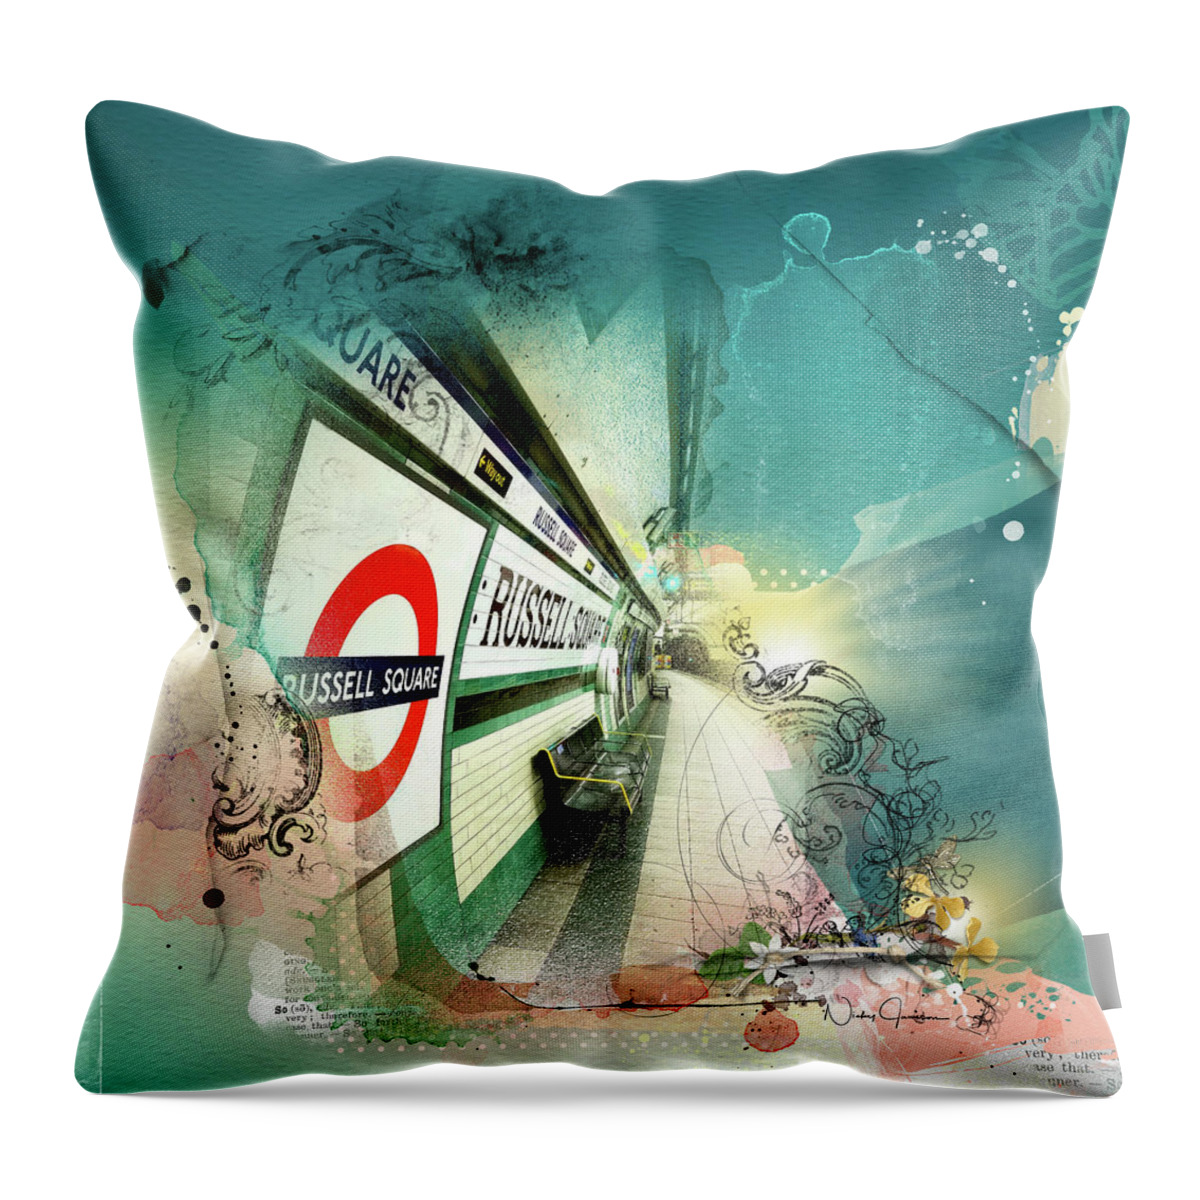 London Throw Pillow featuring the digital art Russell Square Station by Nicky Jameson